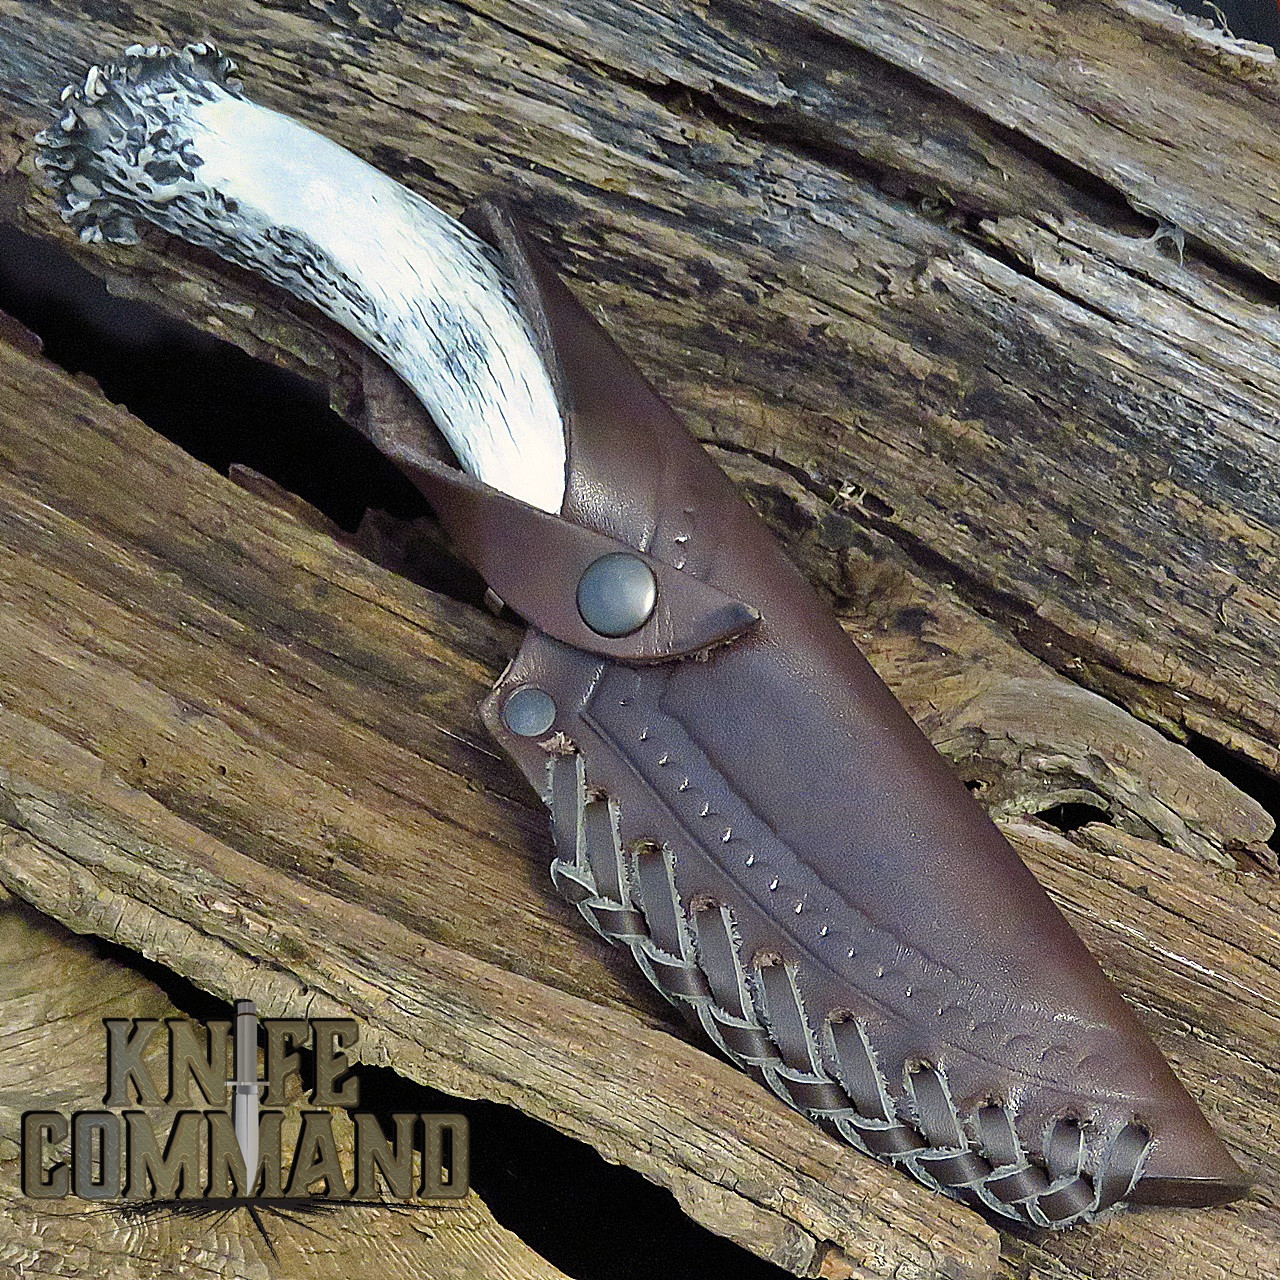 Silver Stag Tool Series Hunter SS6.0 Crown Stag Hunting Knife 6" Clip Point Bowie 1095